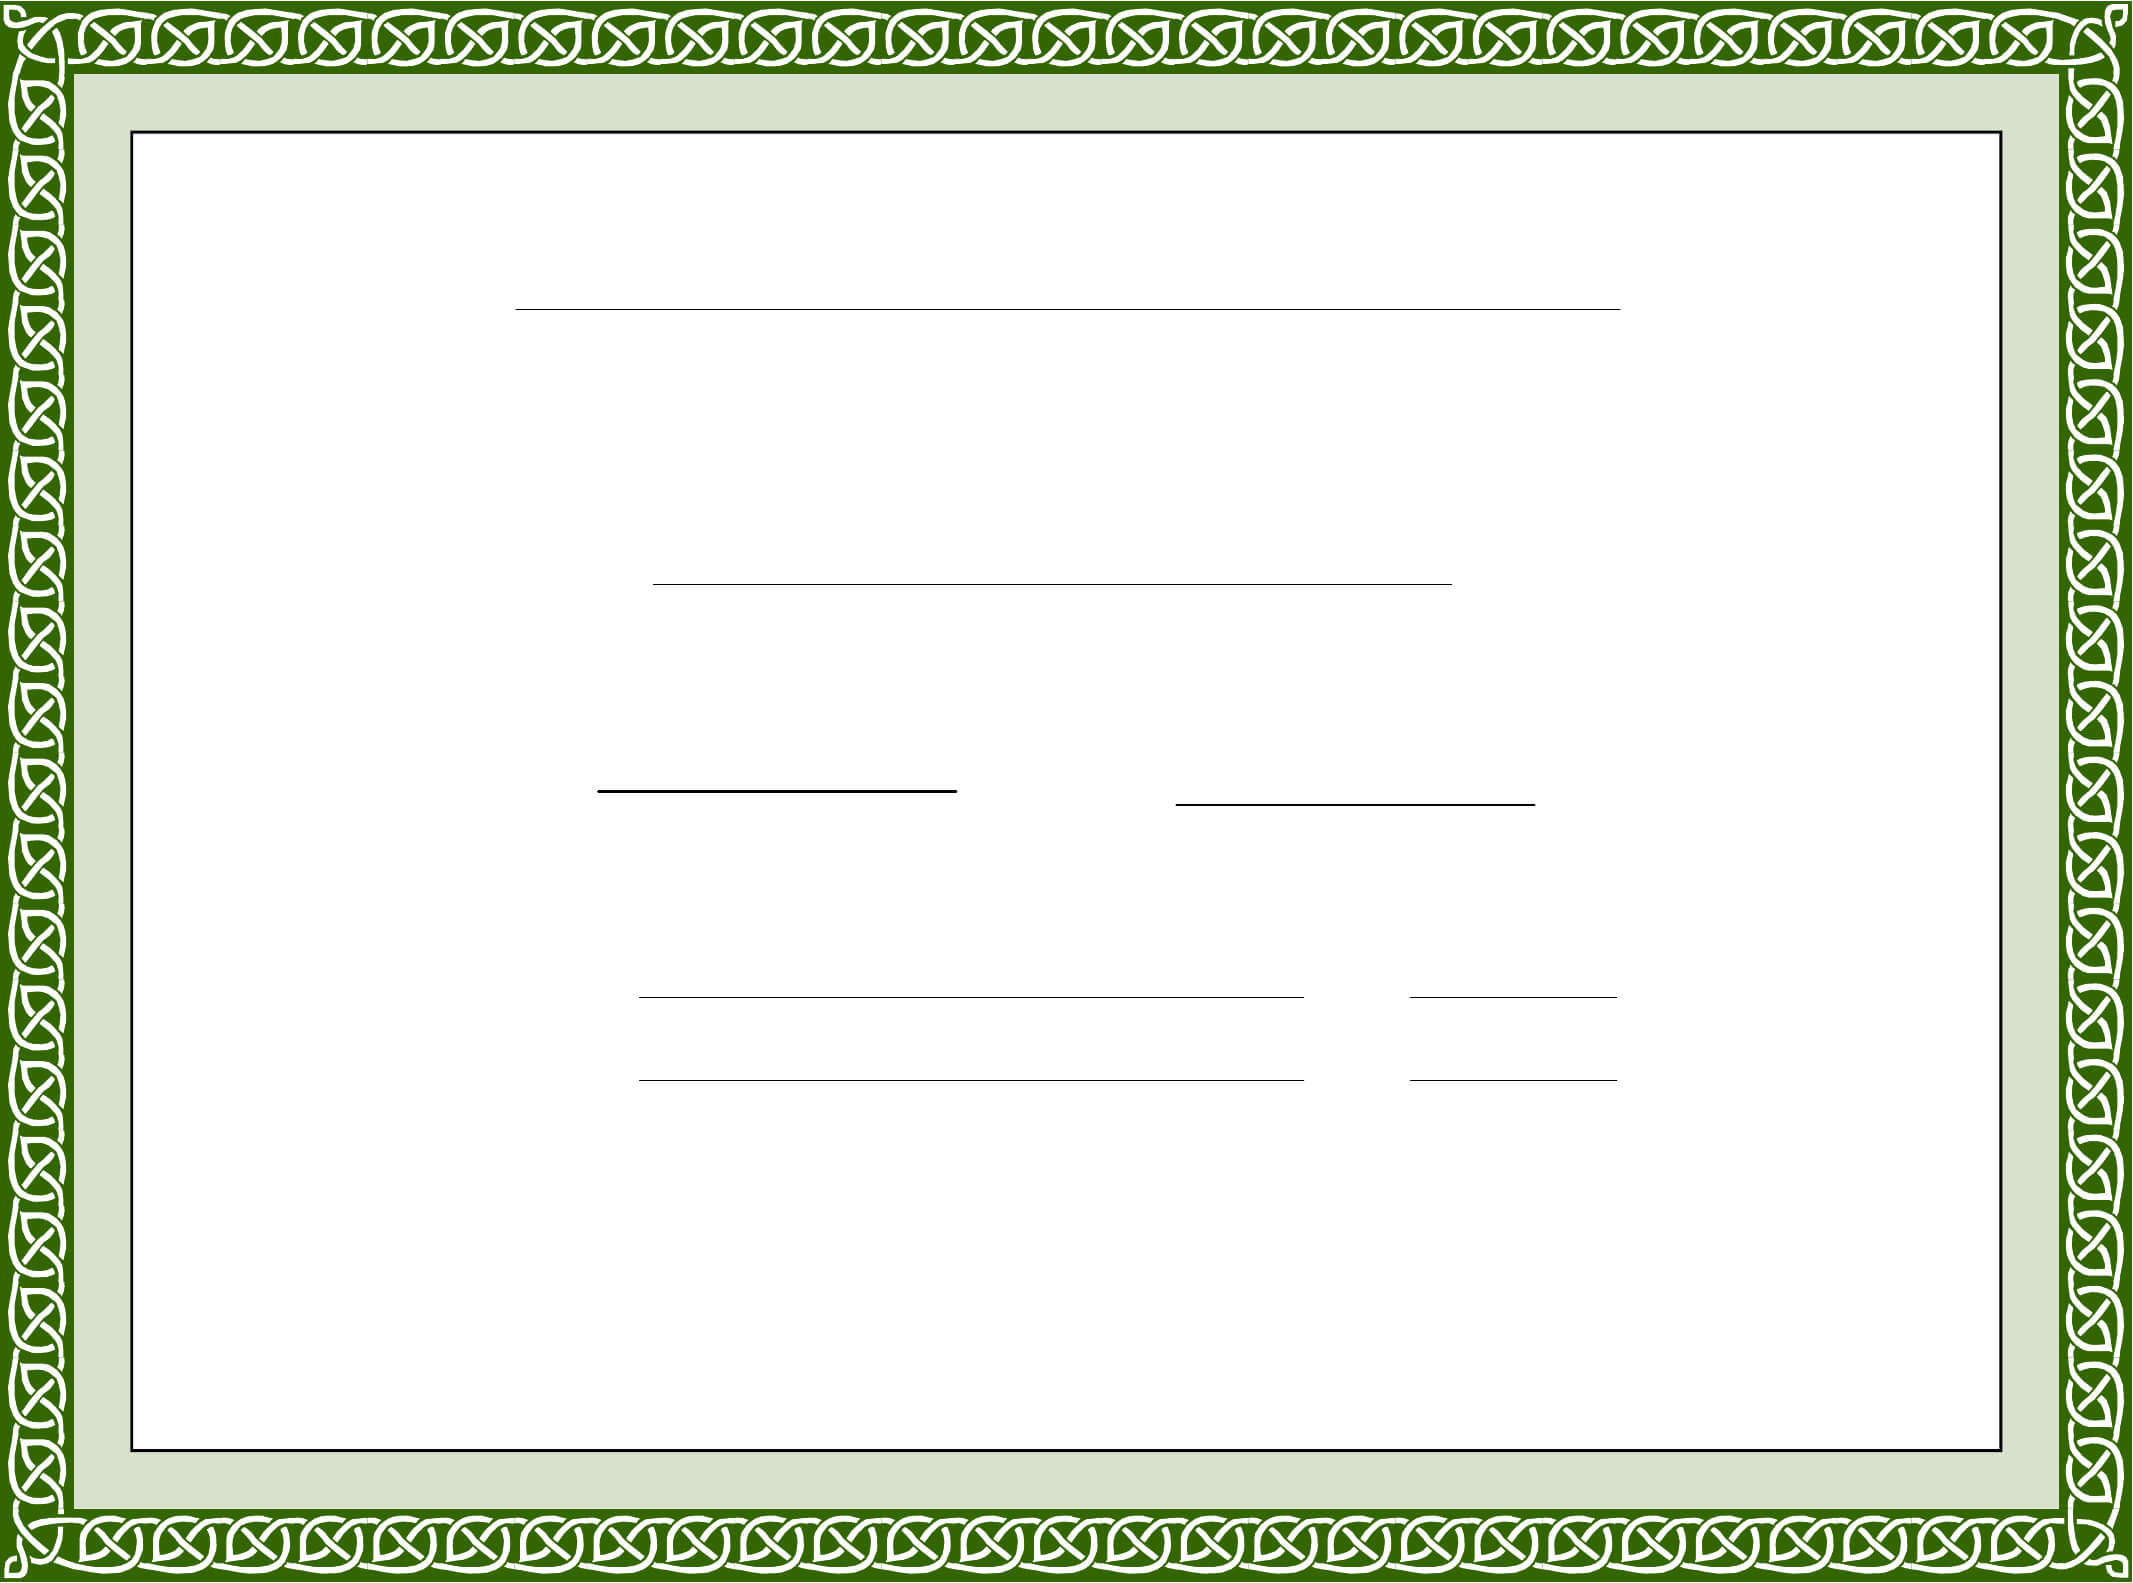 Sample Training Completion Certificate Template Free Download Regarding Free Training Completion Certificate Templates